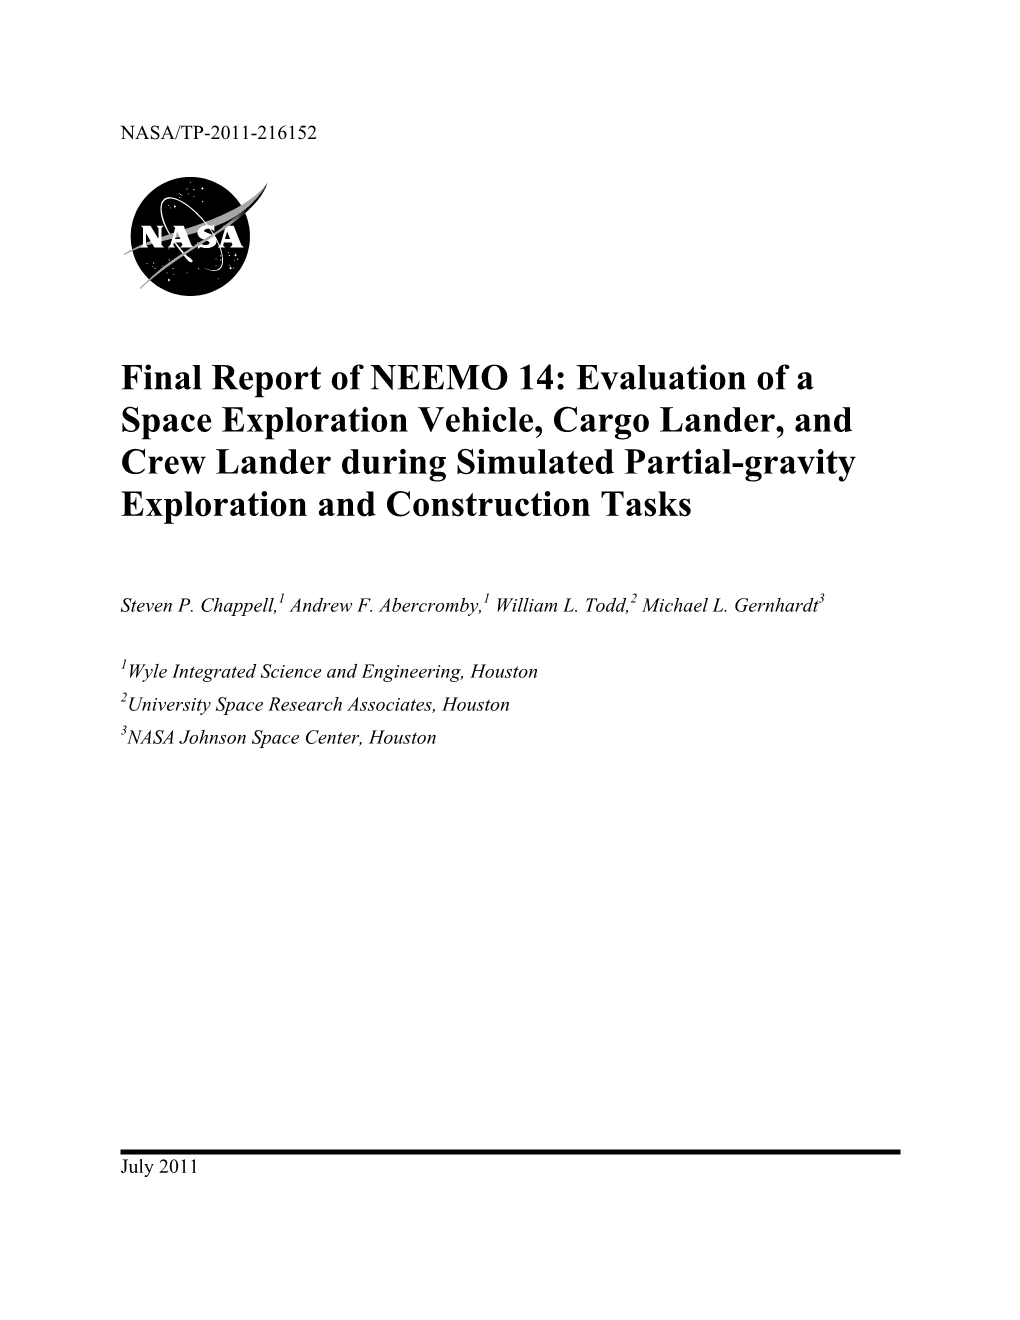 Final Report of NEEMO 14: Evaluation of a Space Exploration Vehicle